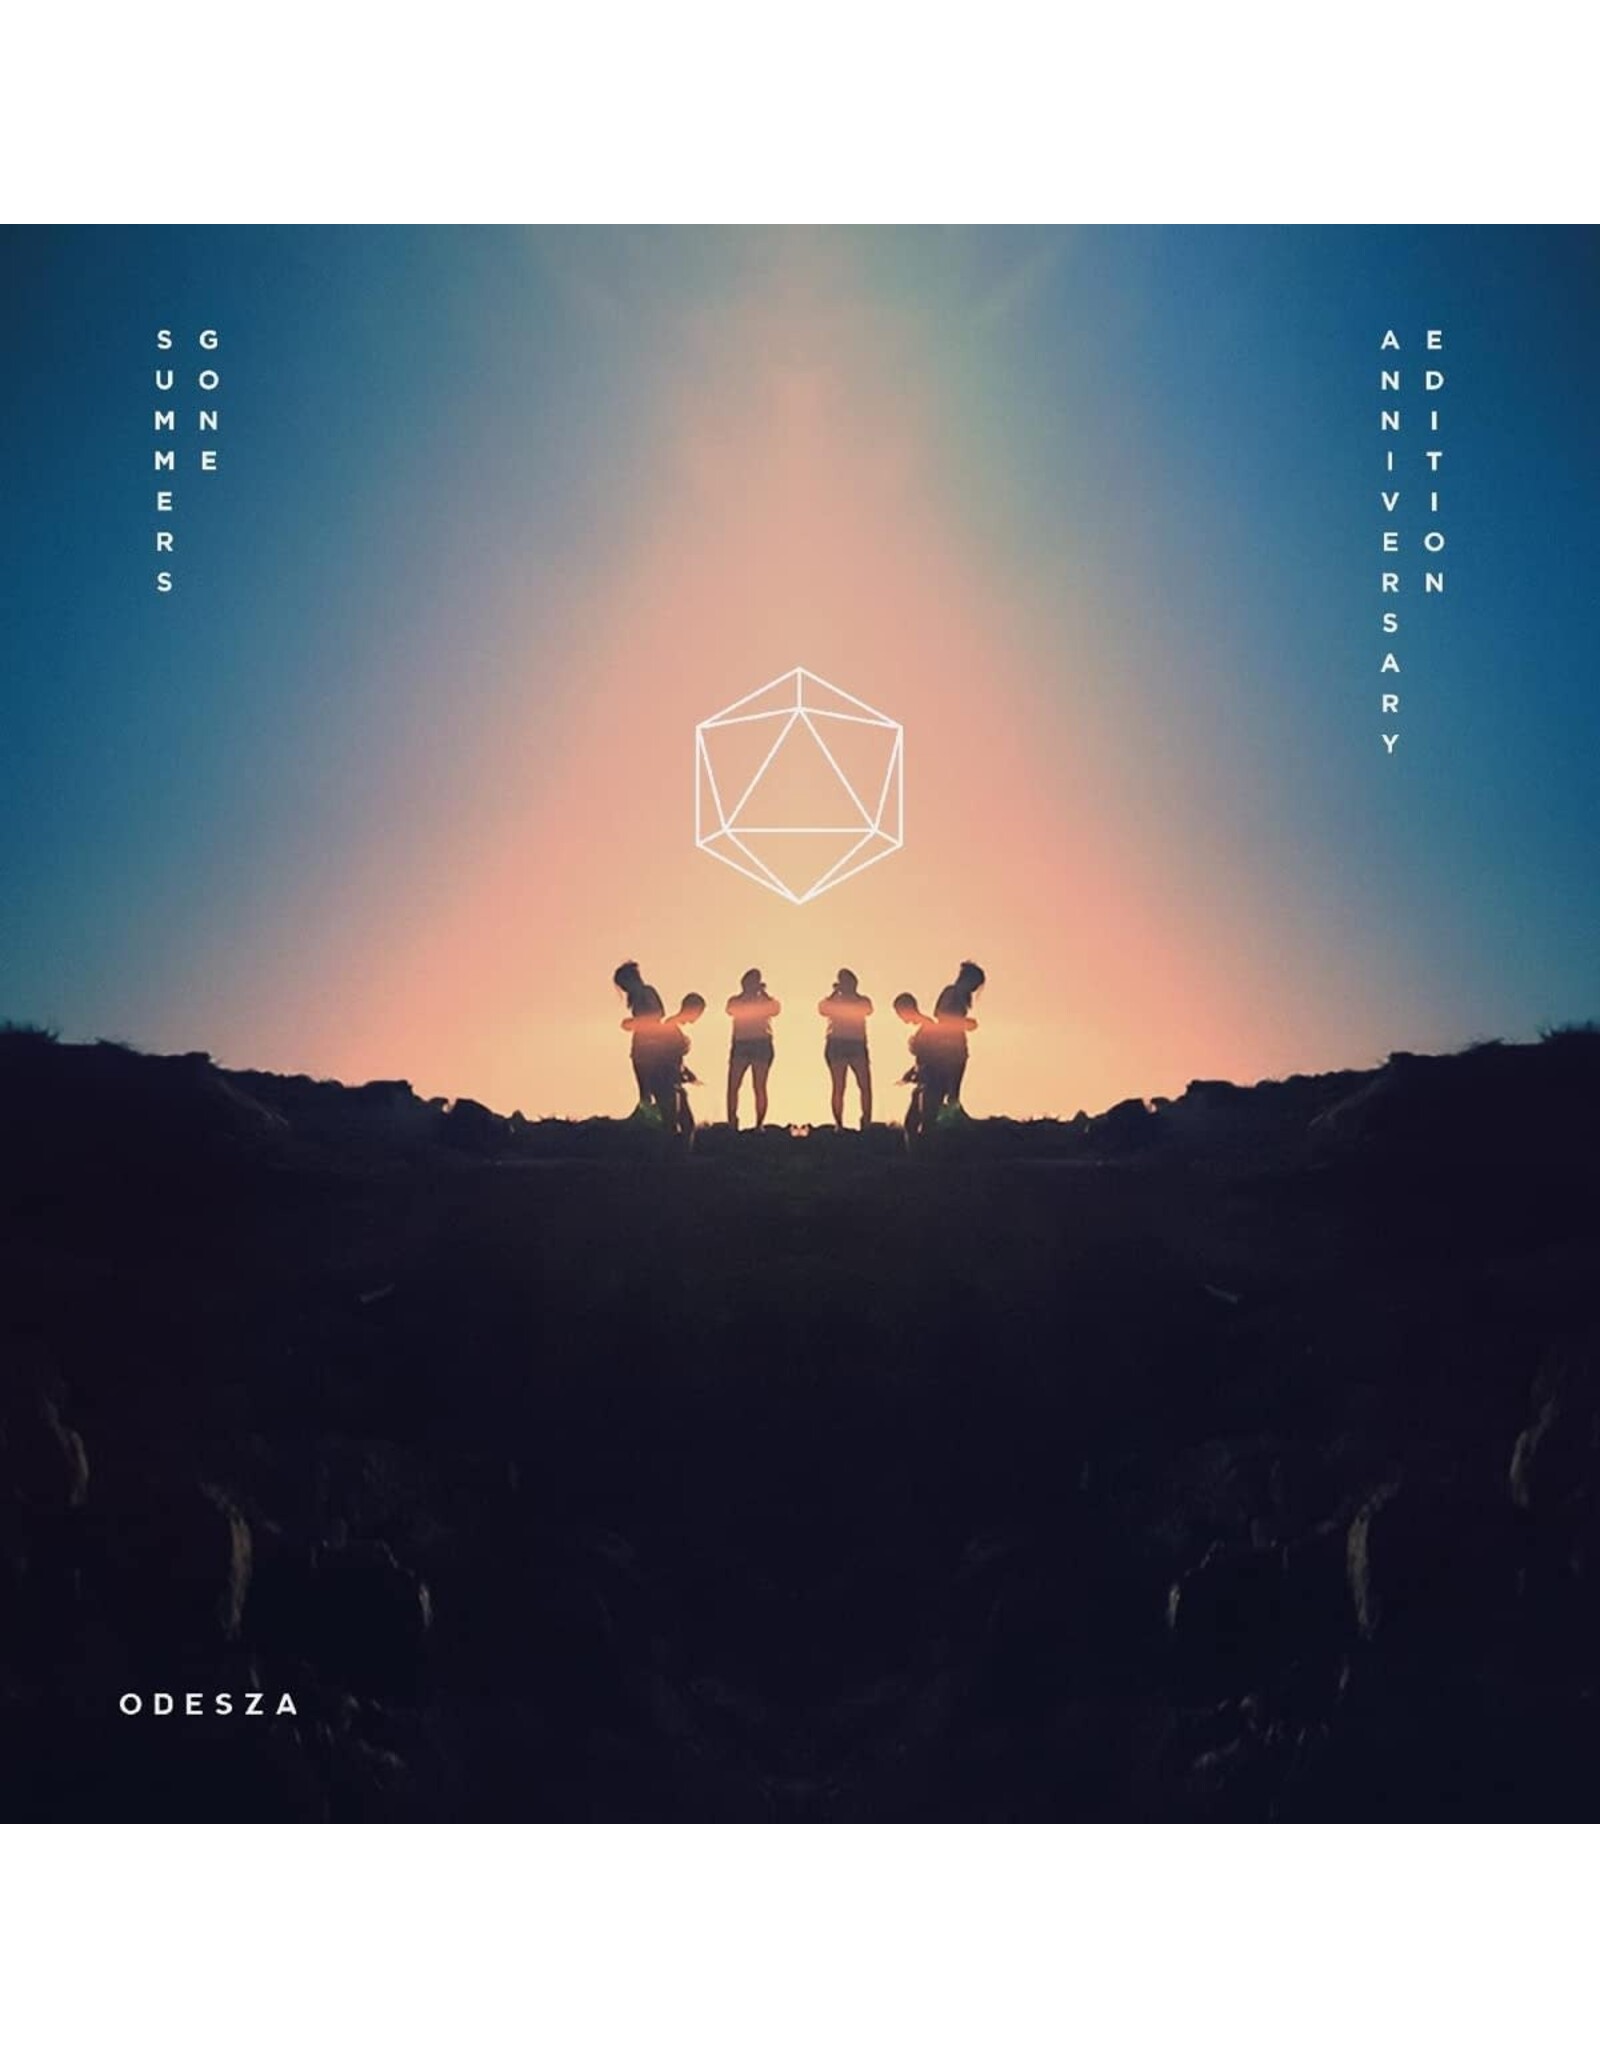 ODESZA - Summer's Gone (10th Anniversary) [Deluxe Edition]